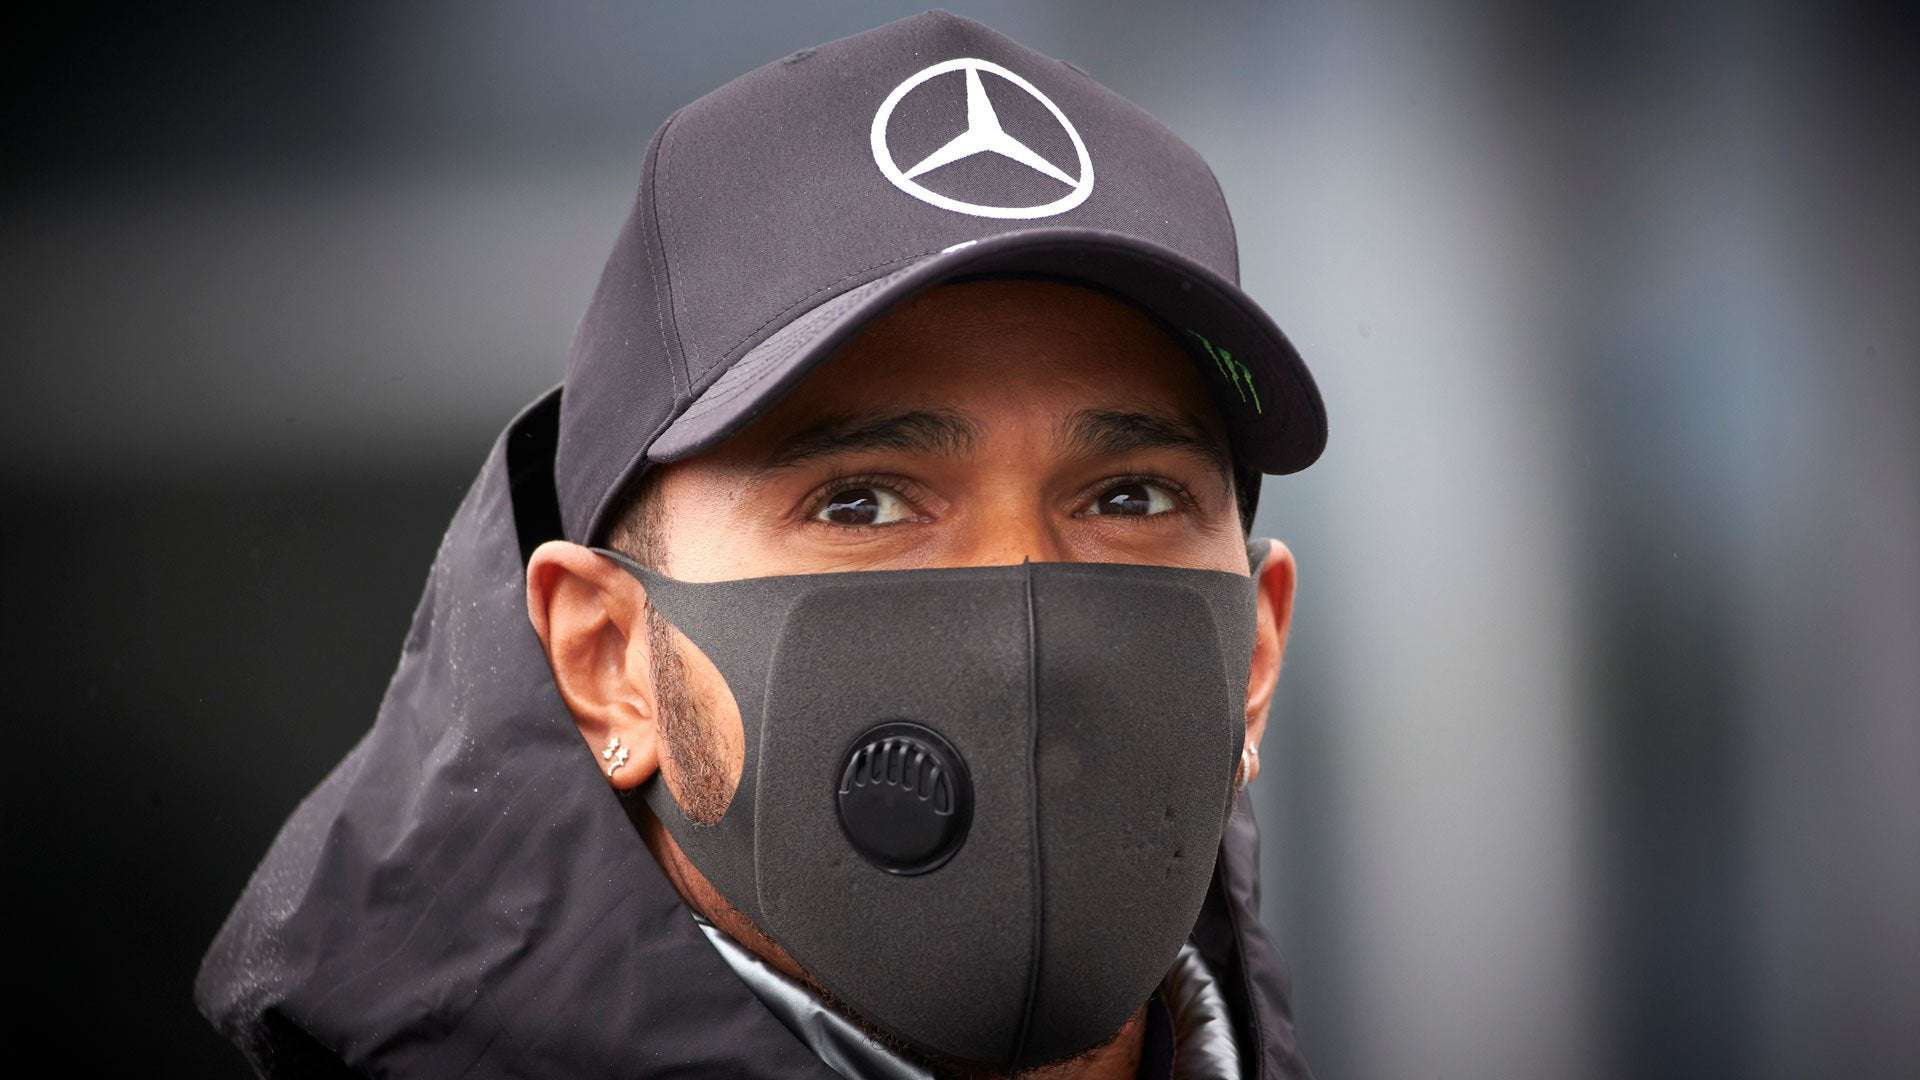 image for Hamilton to make Mercedes return in Abu Dhabi after testing Covid-negative, with Russell heading back to Williams